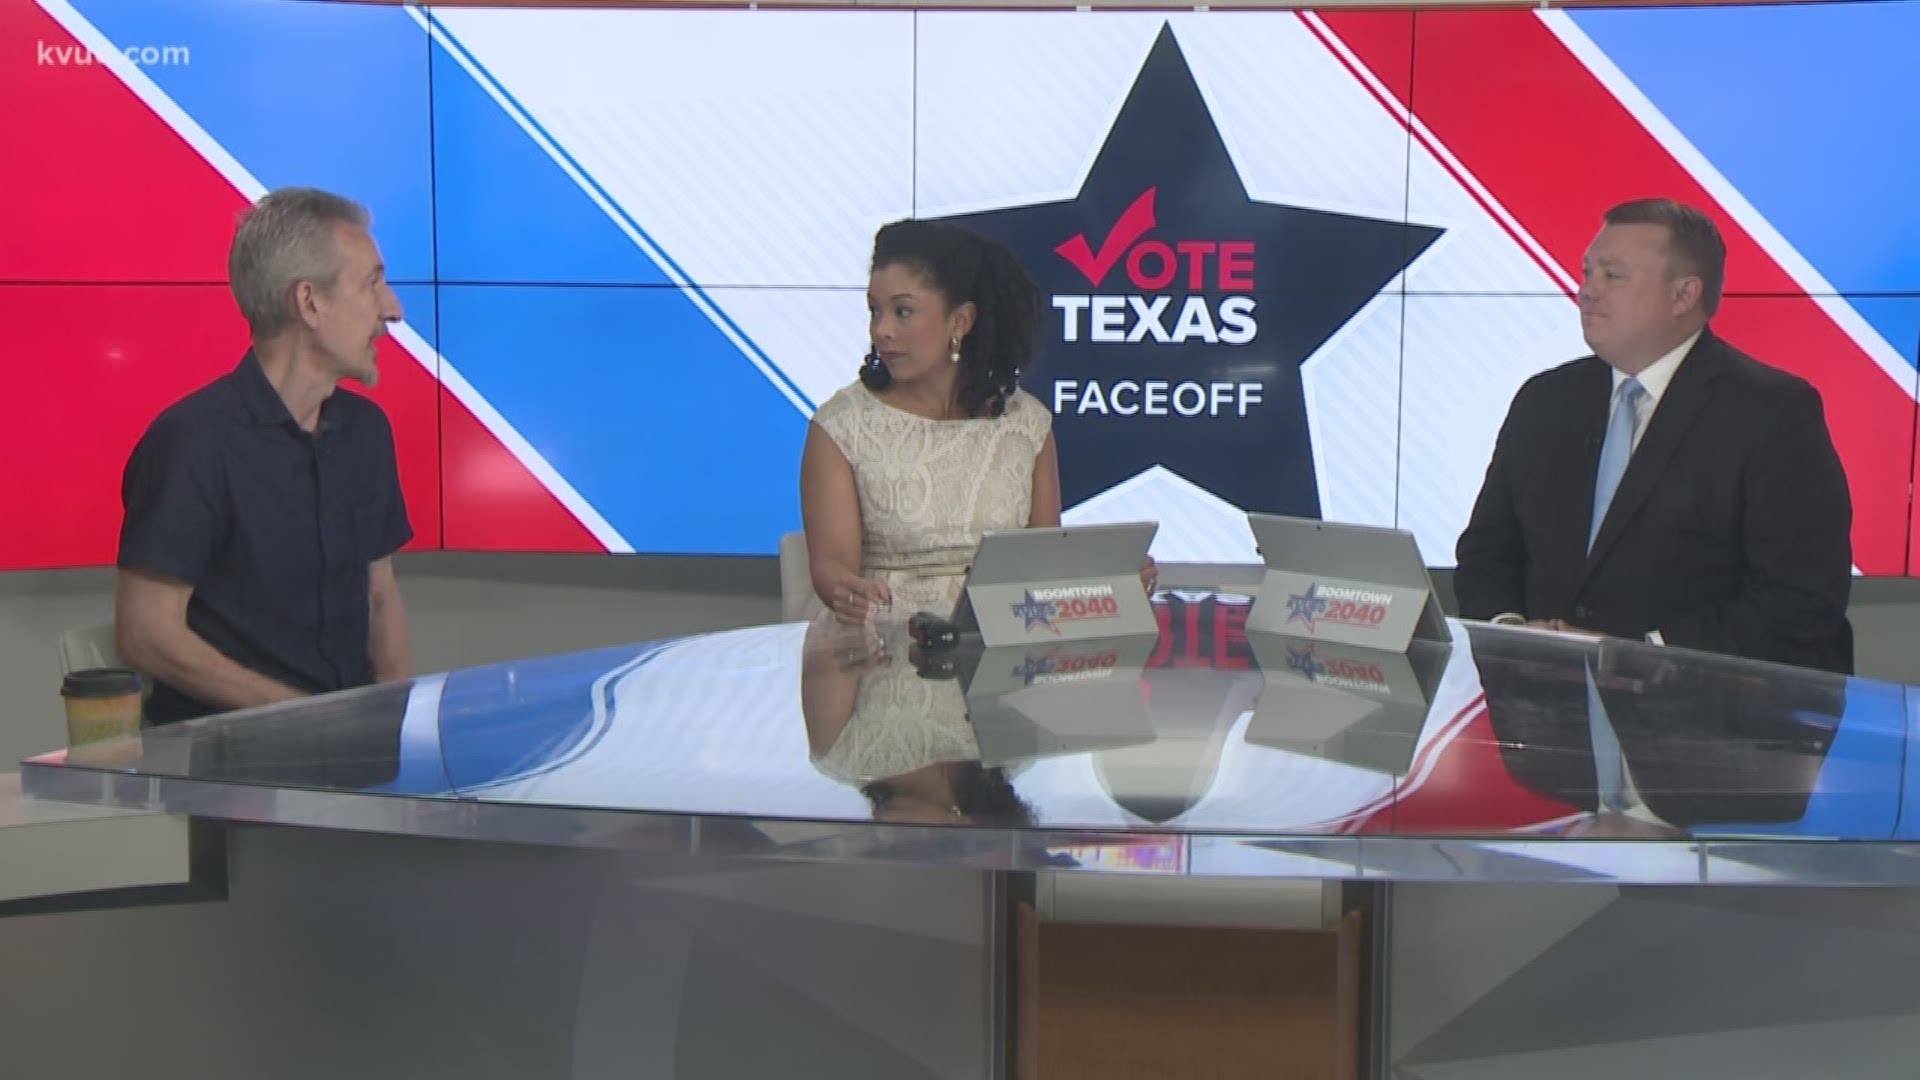 It’s time for our weekly political segment – Texas Face Off. Joining KVUE is Ken Zarifis, who is the president of Education Austin, and Matt Mackowiak, who is the chairman of the Travis County Republican Party.